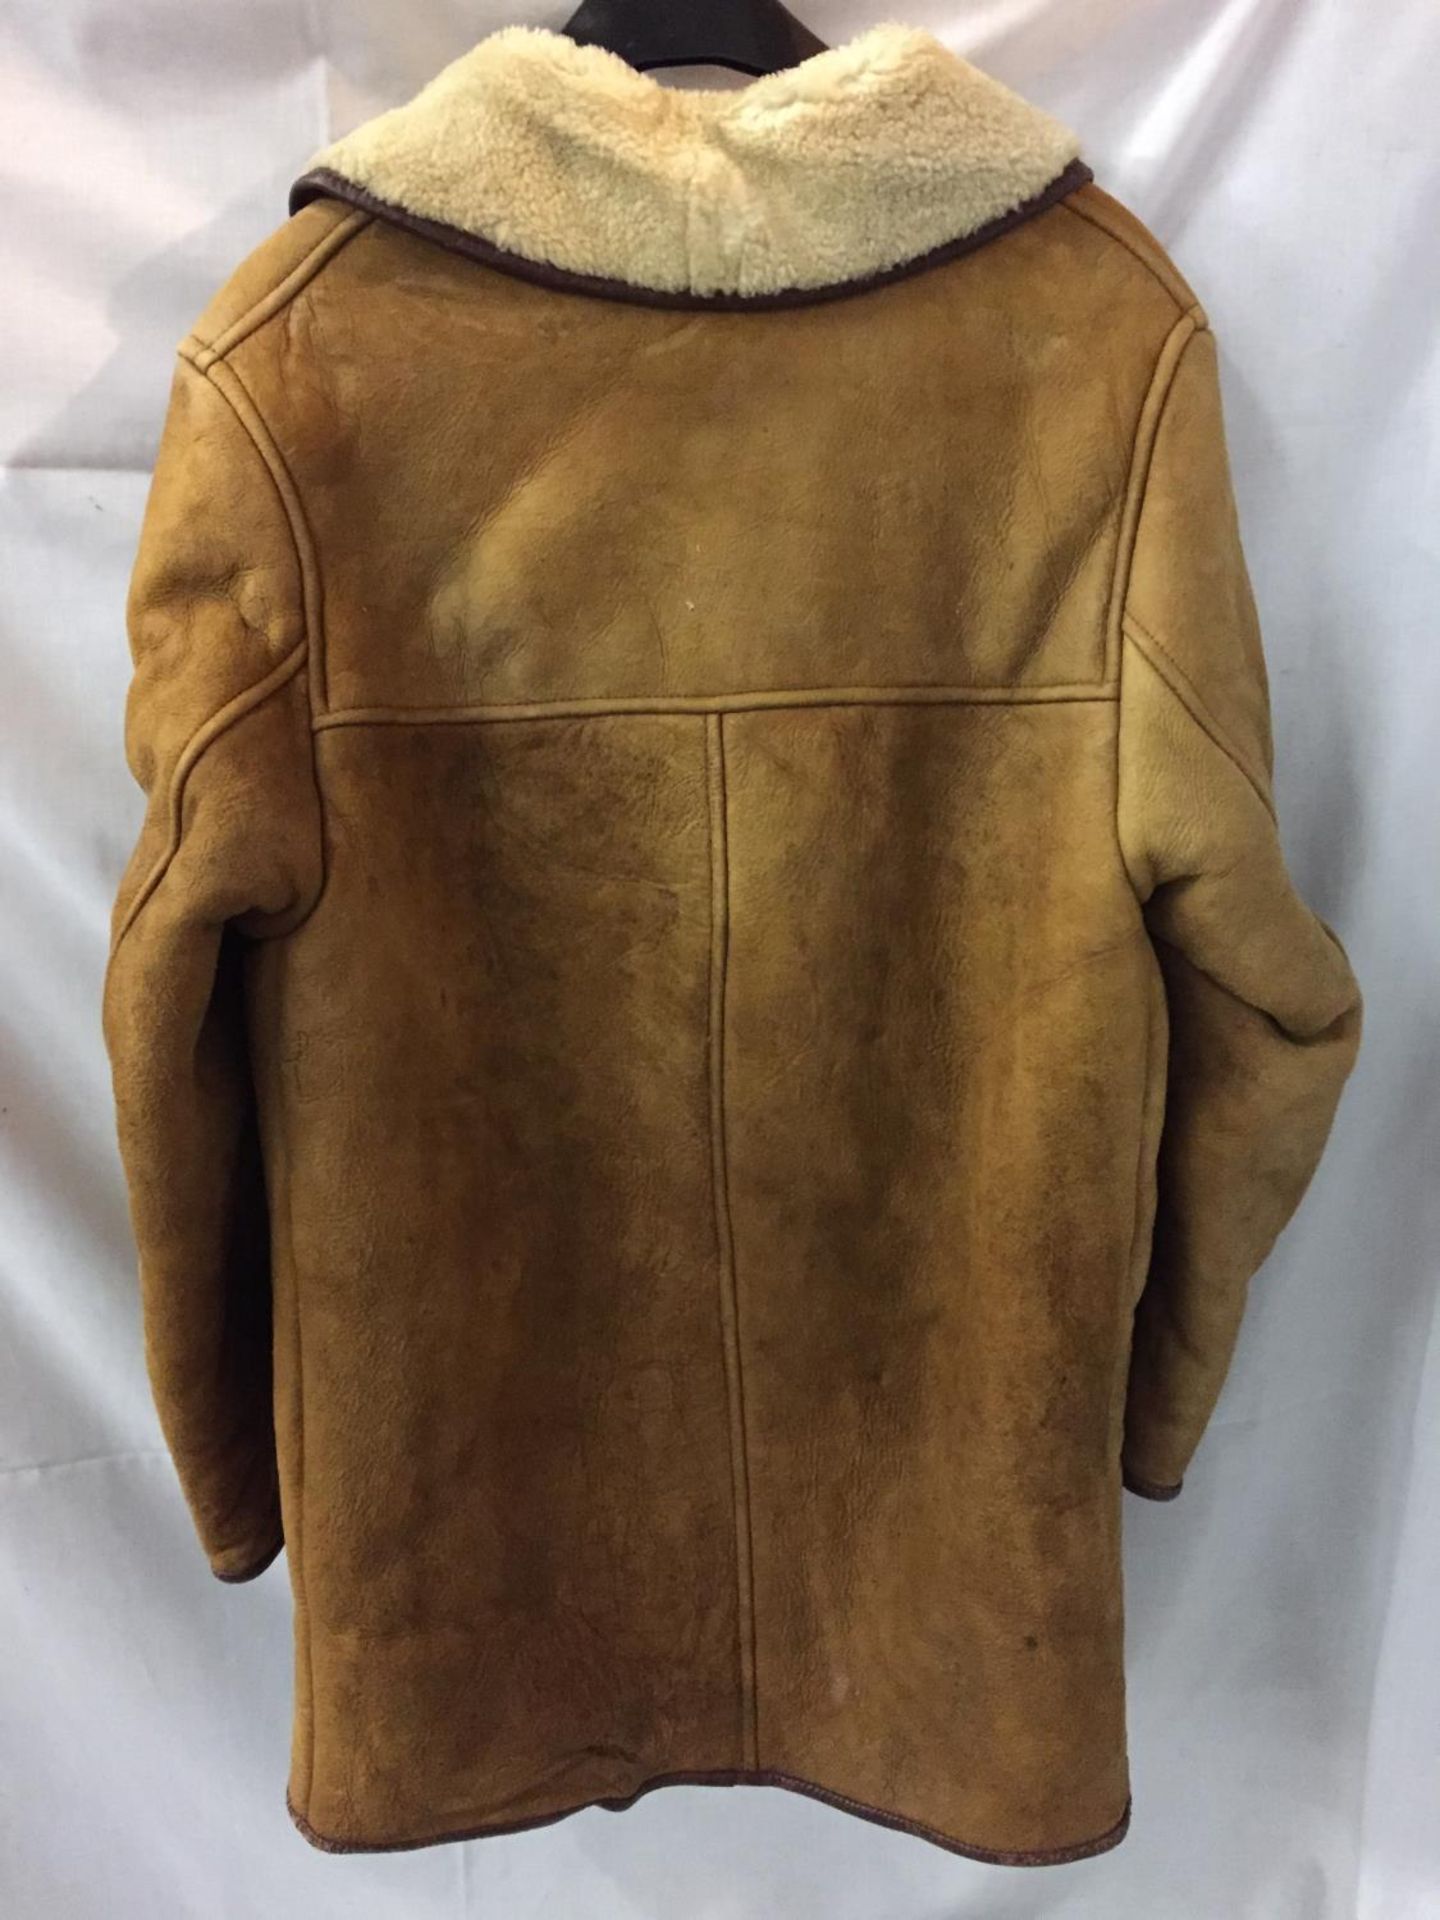 GENT'S SHEEPSKIN COAT, BUTTON FRONT LENGTH 32 INCHES/81CM - Image 3 of 3